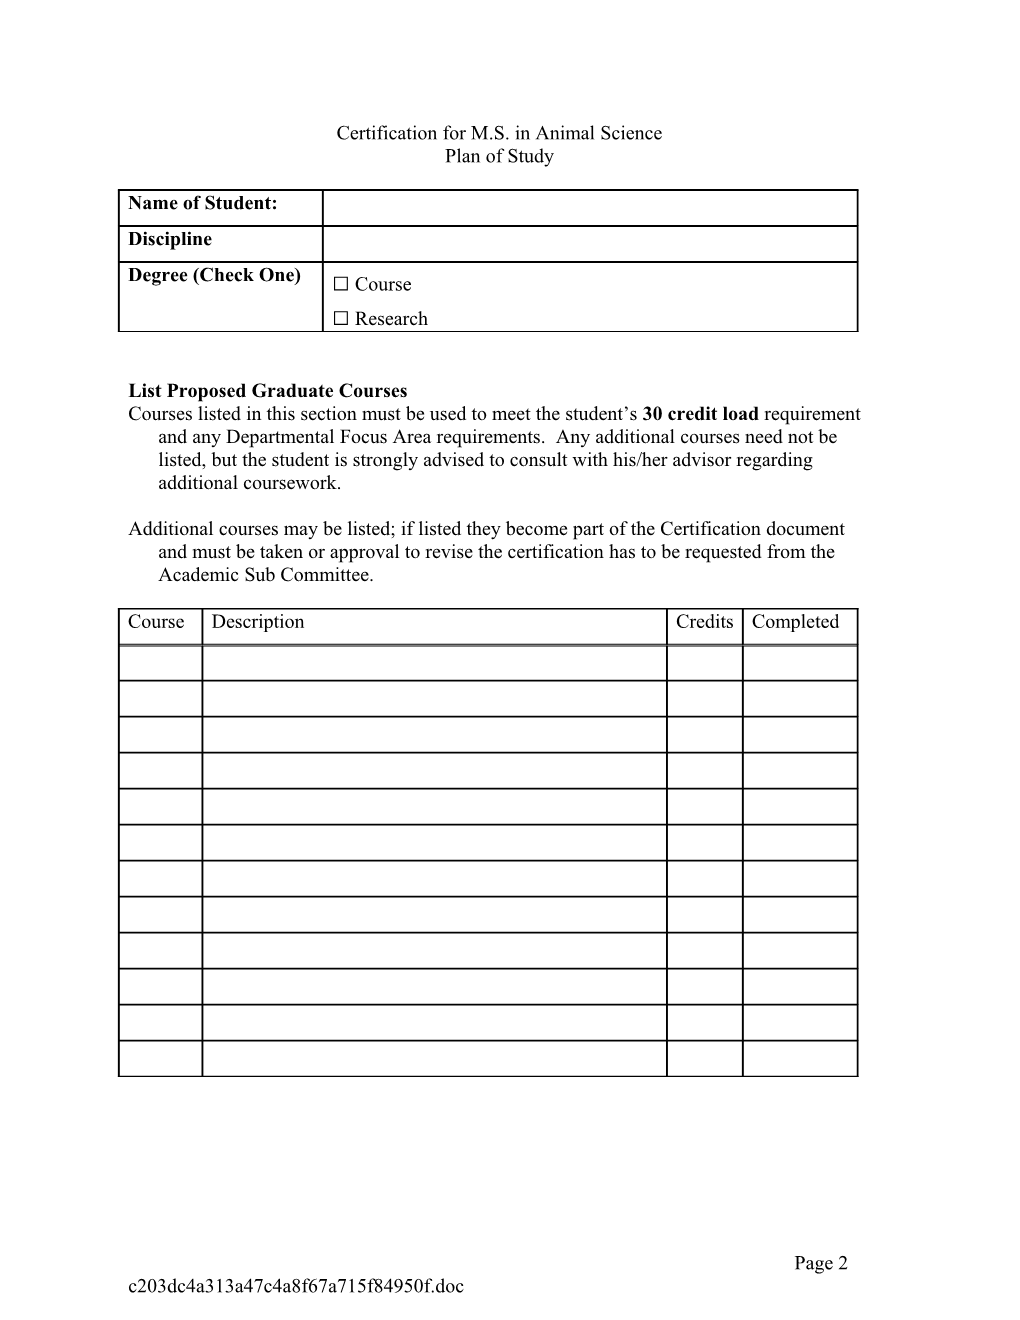 Animal Science M.S. Certification Form